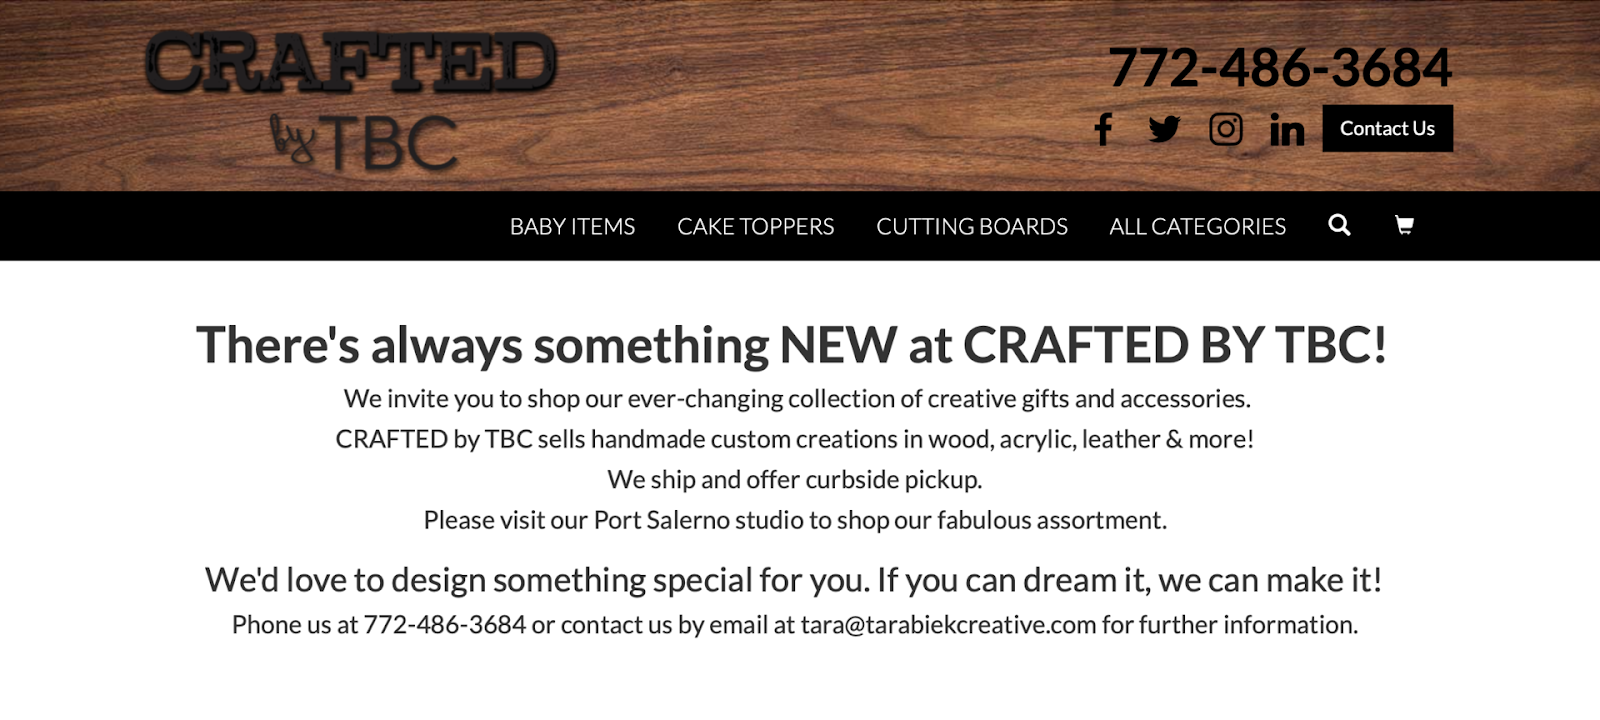 Knowing when to rebrand is important for businesses. This is an image of Crafted by TBC's rebranded website showing a message to customers about the rebrand.